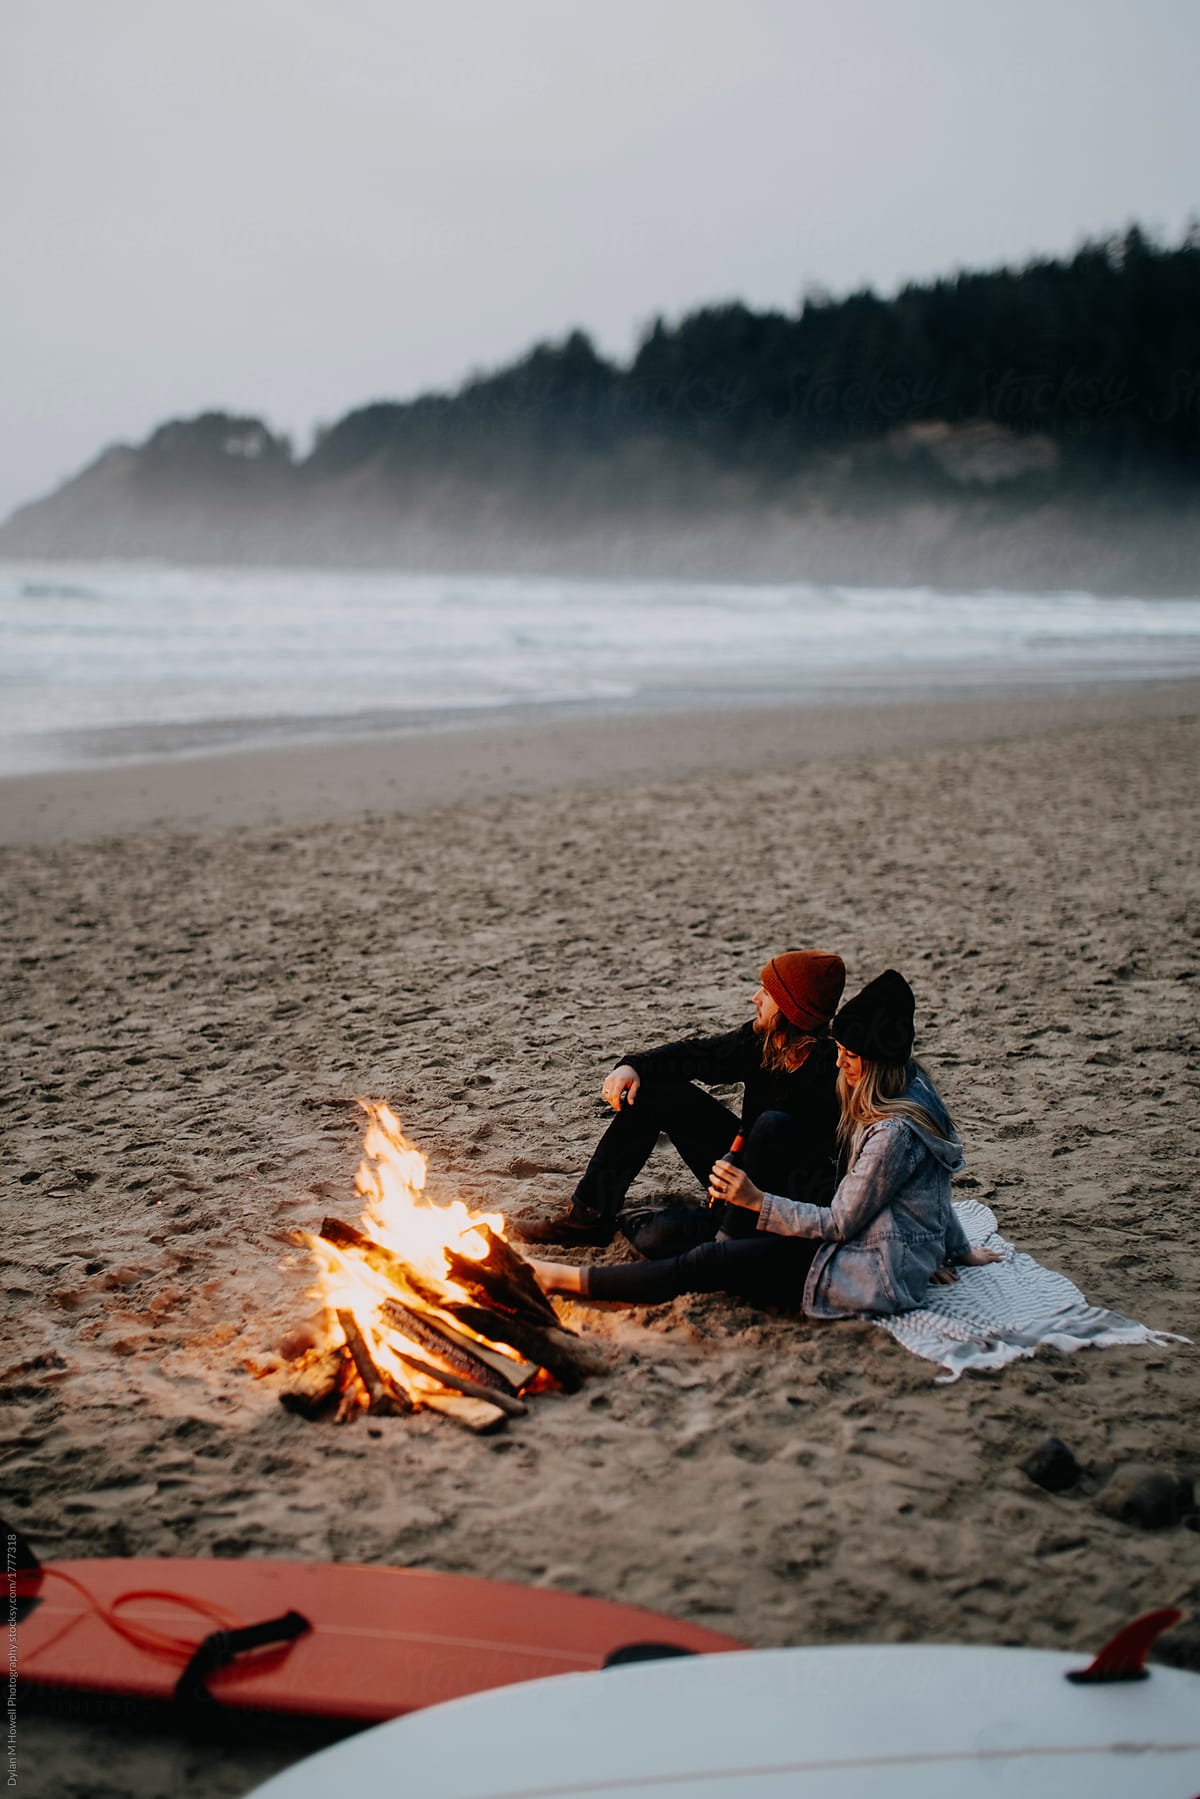 couple has a campfire after surfing